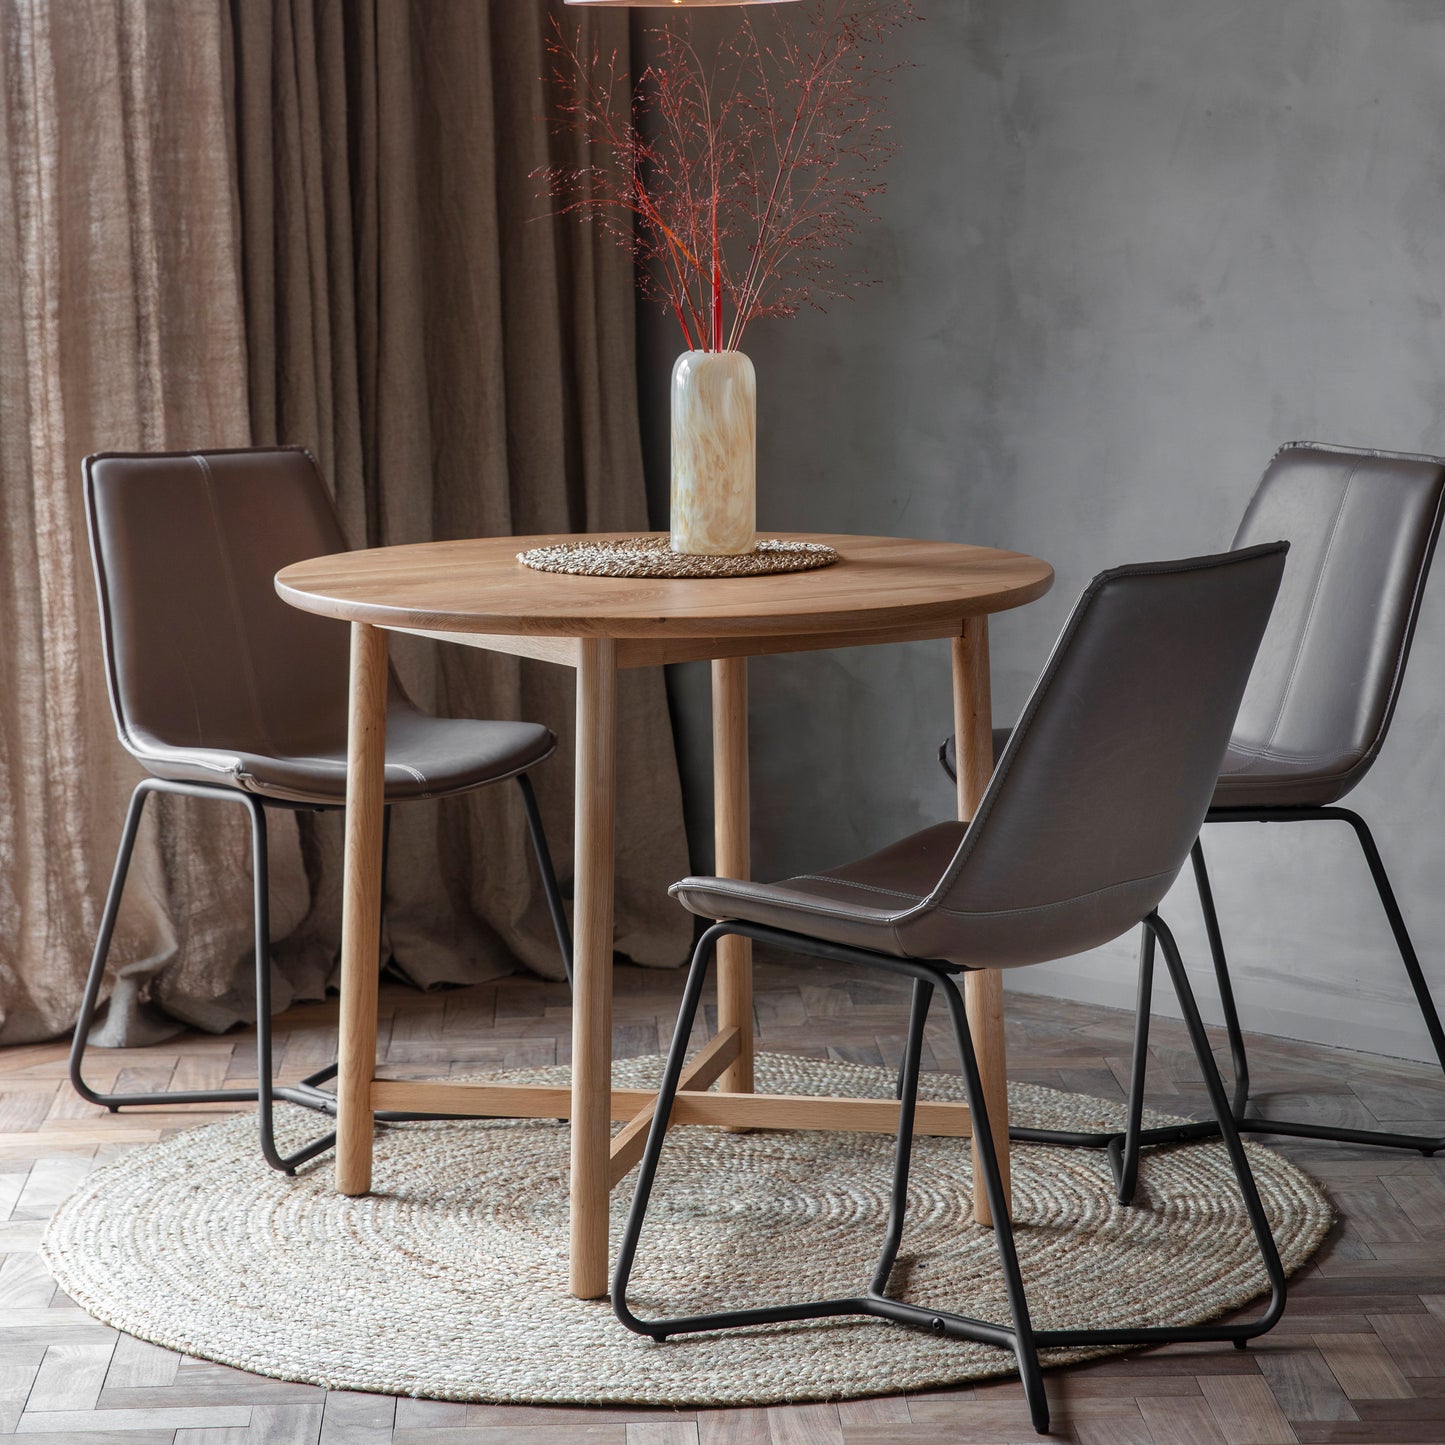 A Wembury Round Dining Table 900x900x750mm from Kikiathome.co.uk for home furniture and interior decor, with four chairs and a vase.